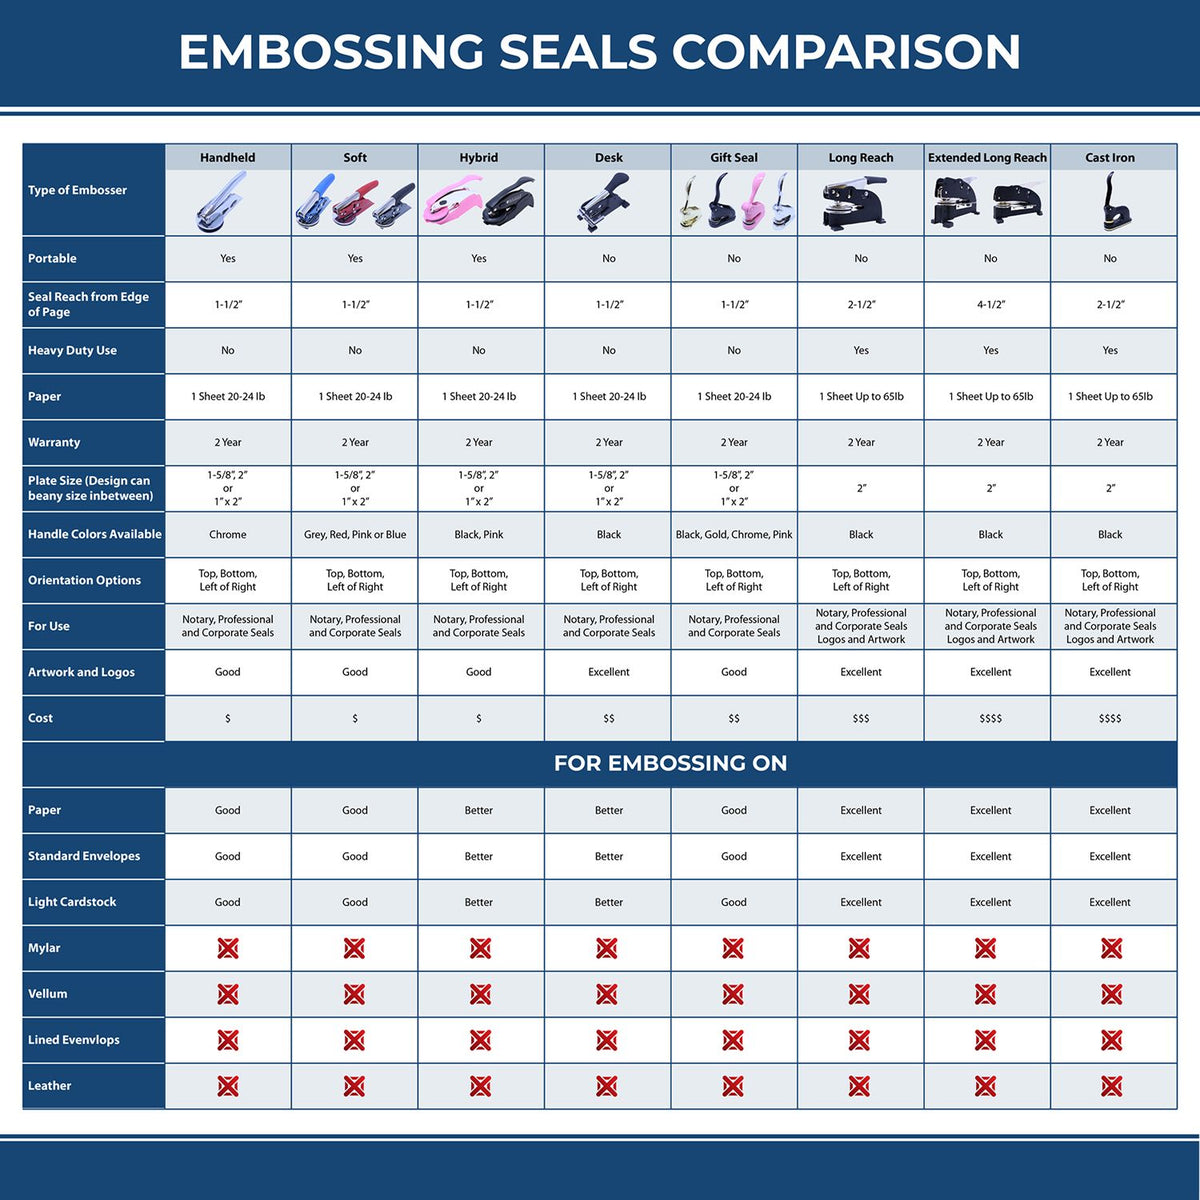 A comparison chart for the different types of mount models available for the Hybrid Arizona Architect Seal